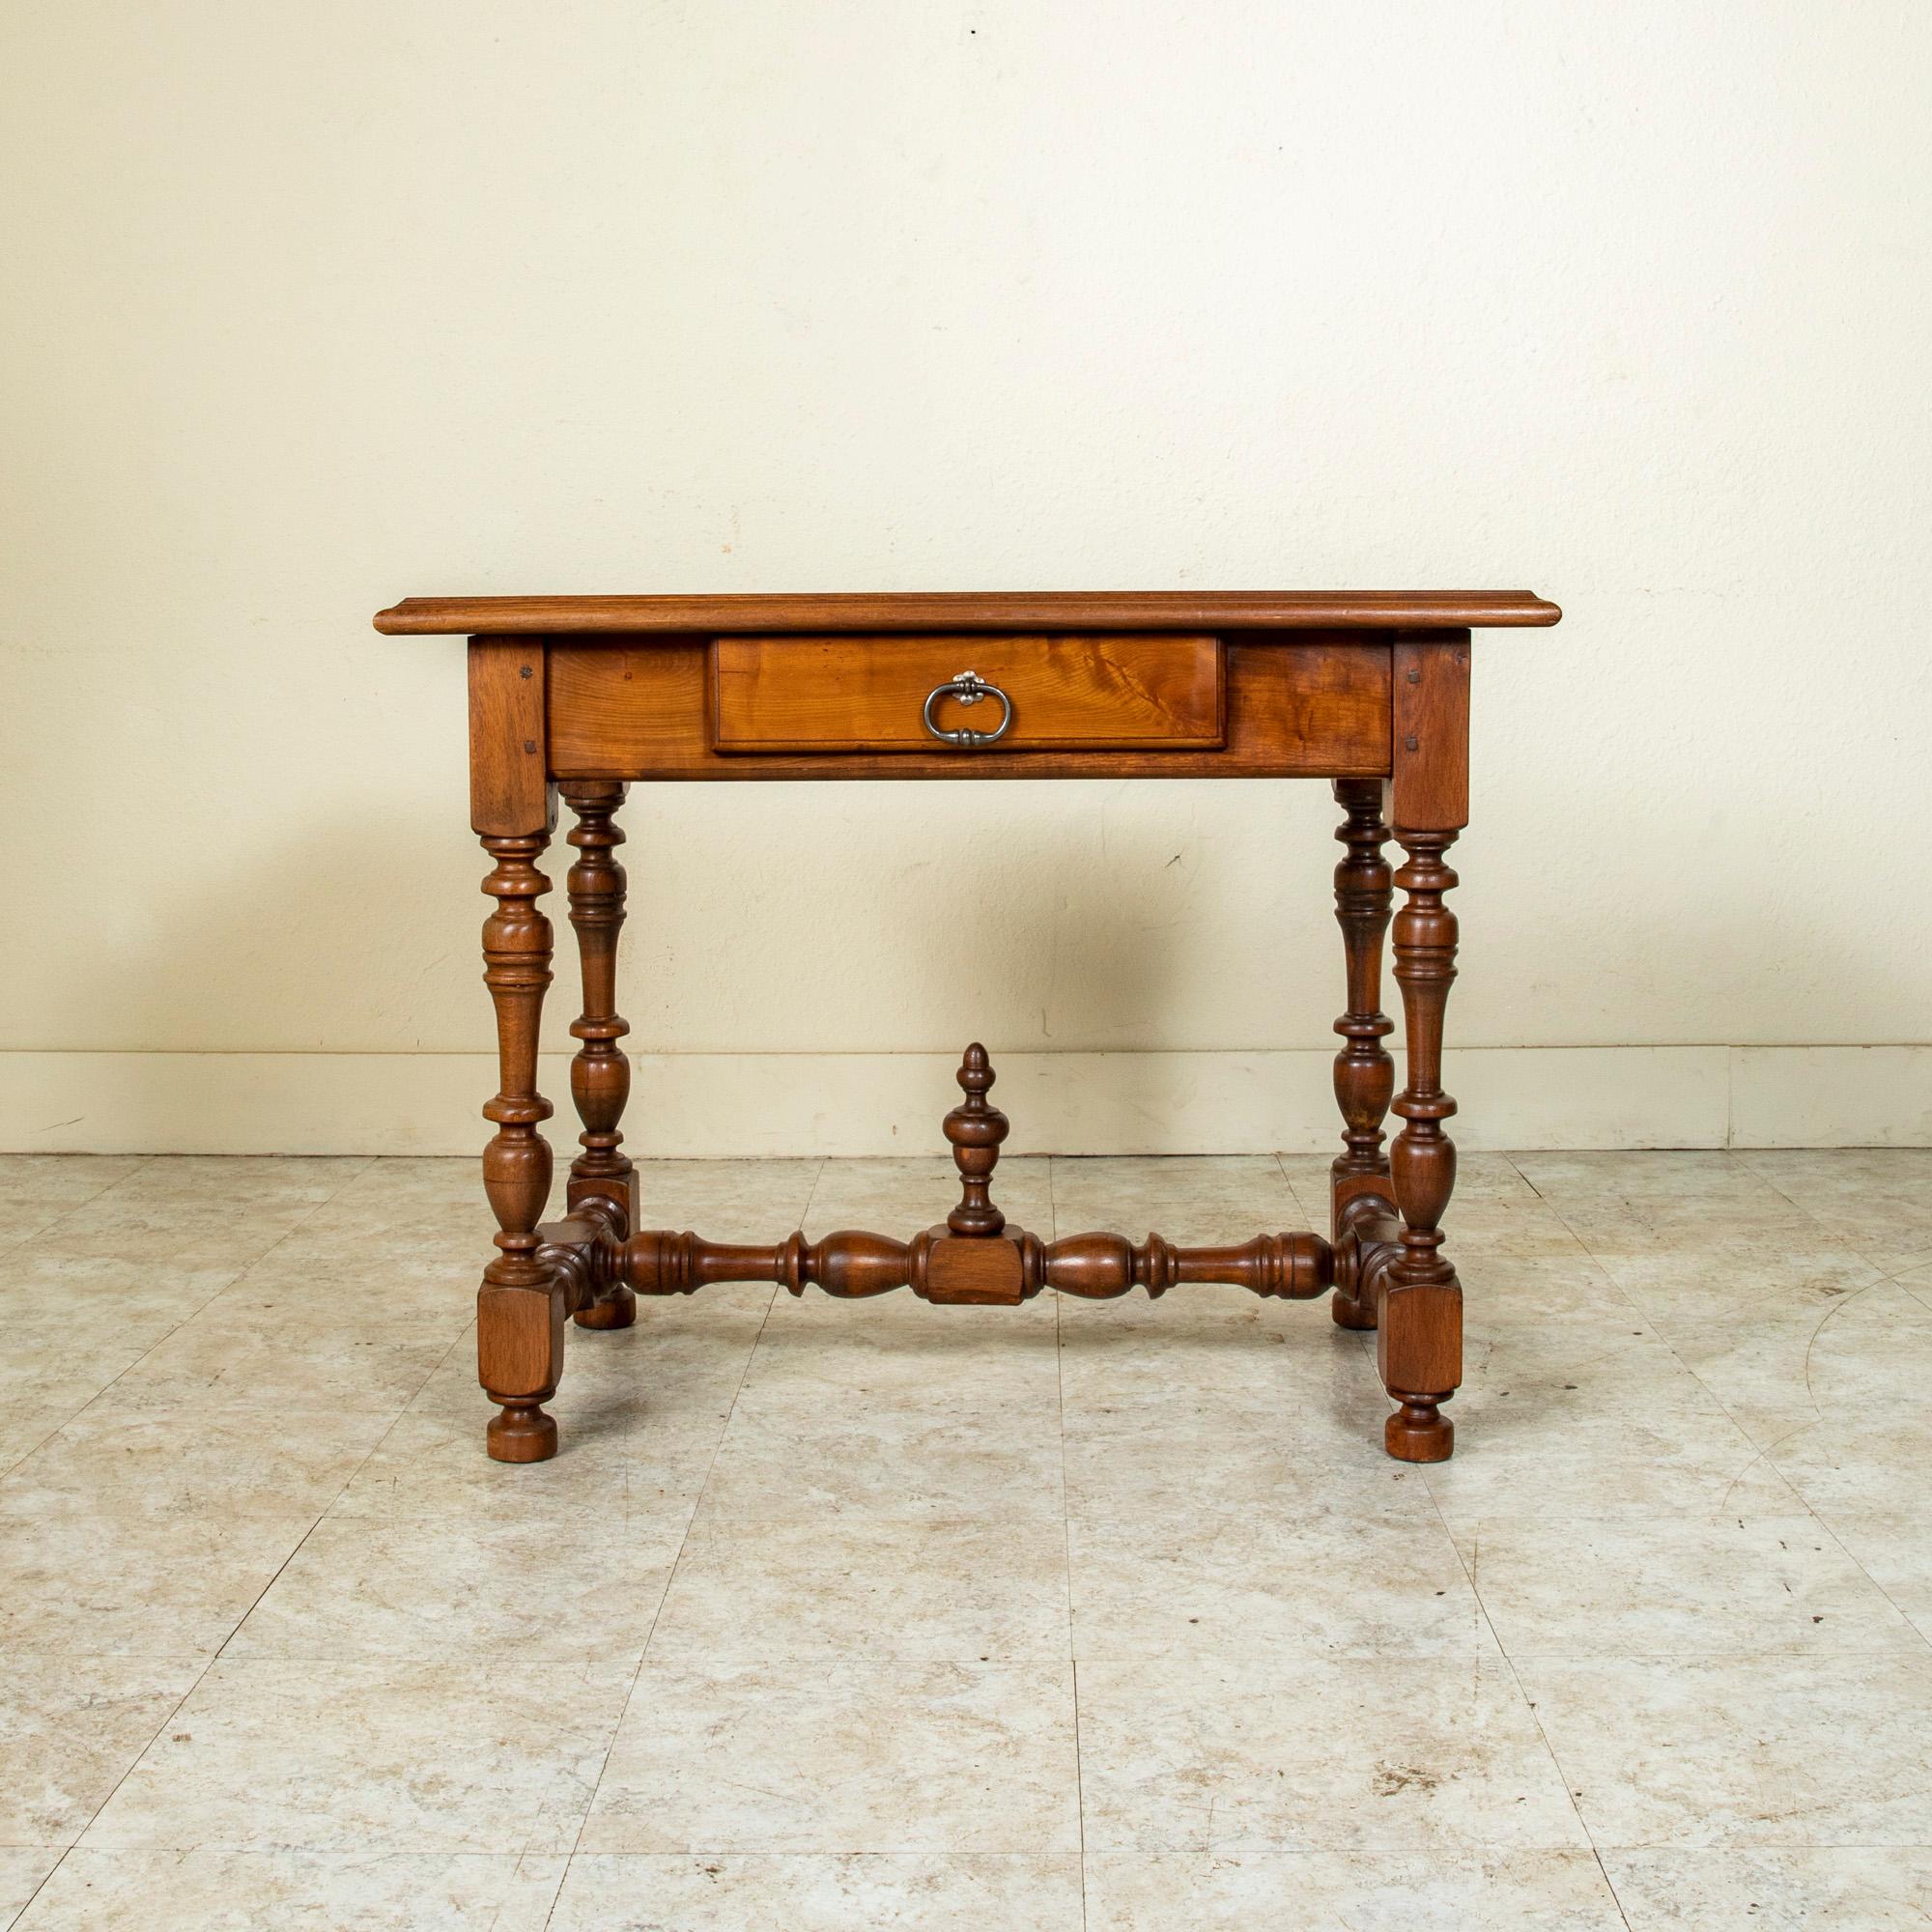 This late 19th century French Henri II Renaissance style hand pegged walnut writing table or side table is finished on all sides, allowing it to be placed in the center of a room. Its beveled top rests above a single drawer of dovetail construction